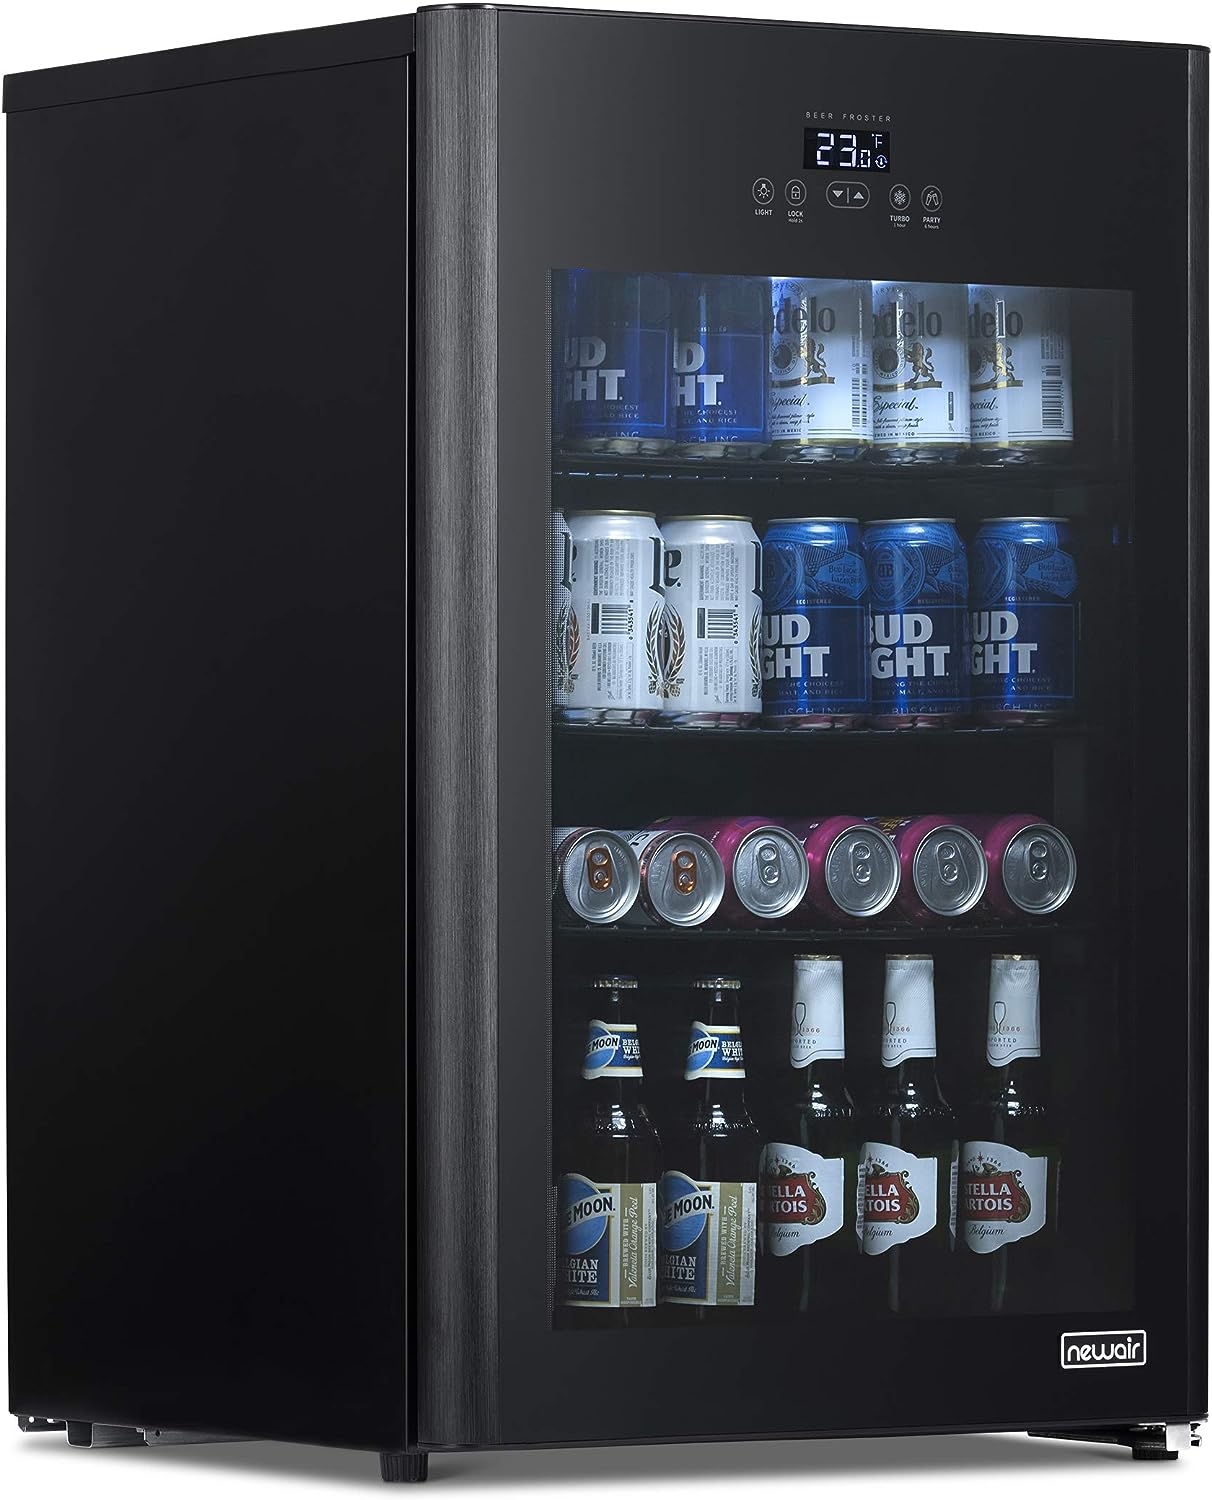 NewAir Beer Froster Mini Fridge for Man Cave | DeviceDaily.com